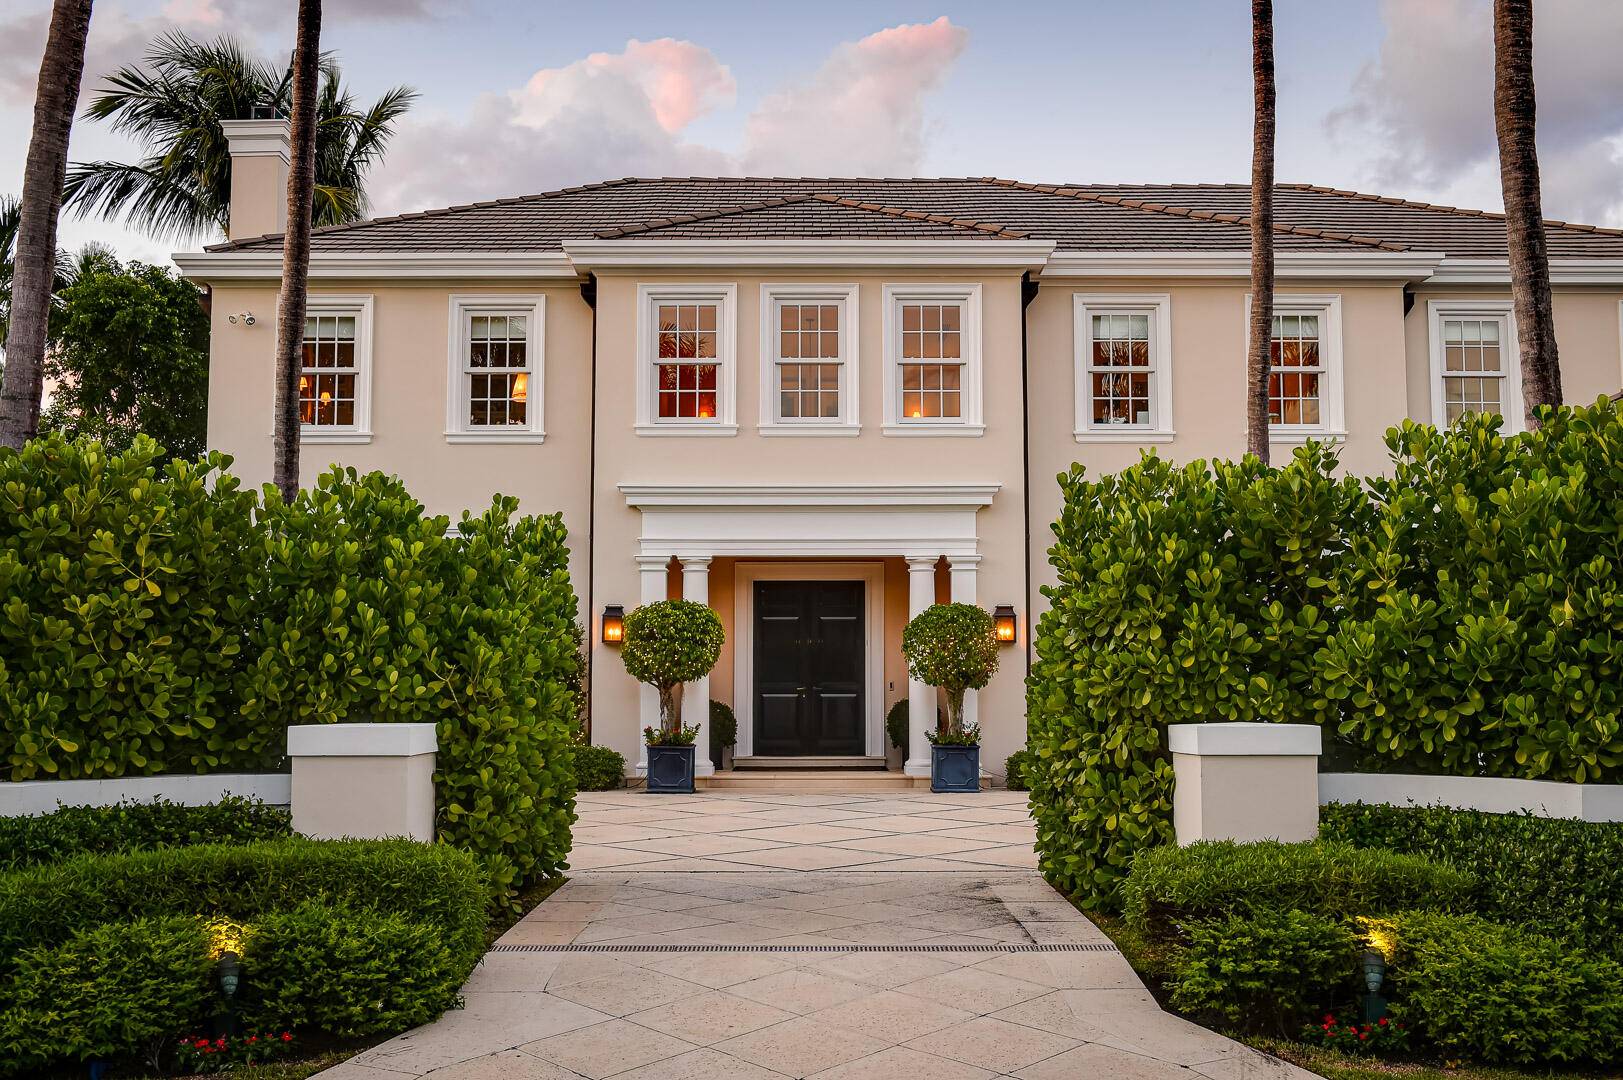 Beautiful 5BR 6. 3BA Traditional Georgian style home located in Palm Beach's acclaimed Estate Section.